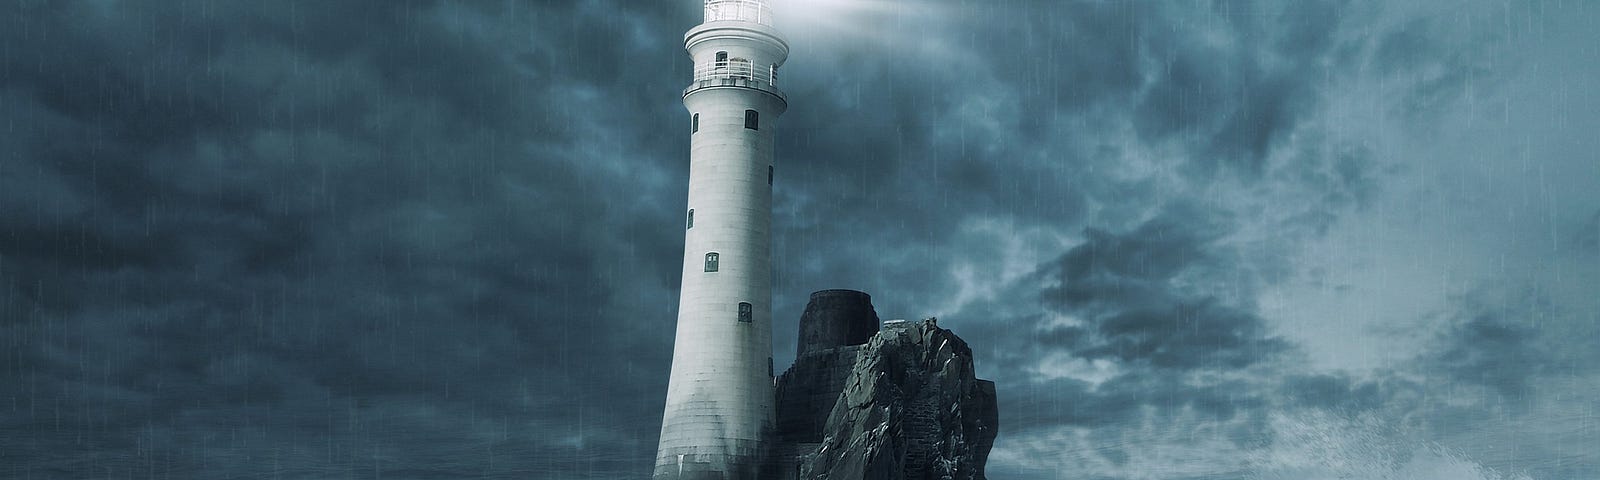 A lighthouse shines through the storm.